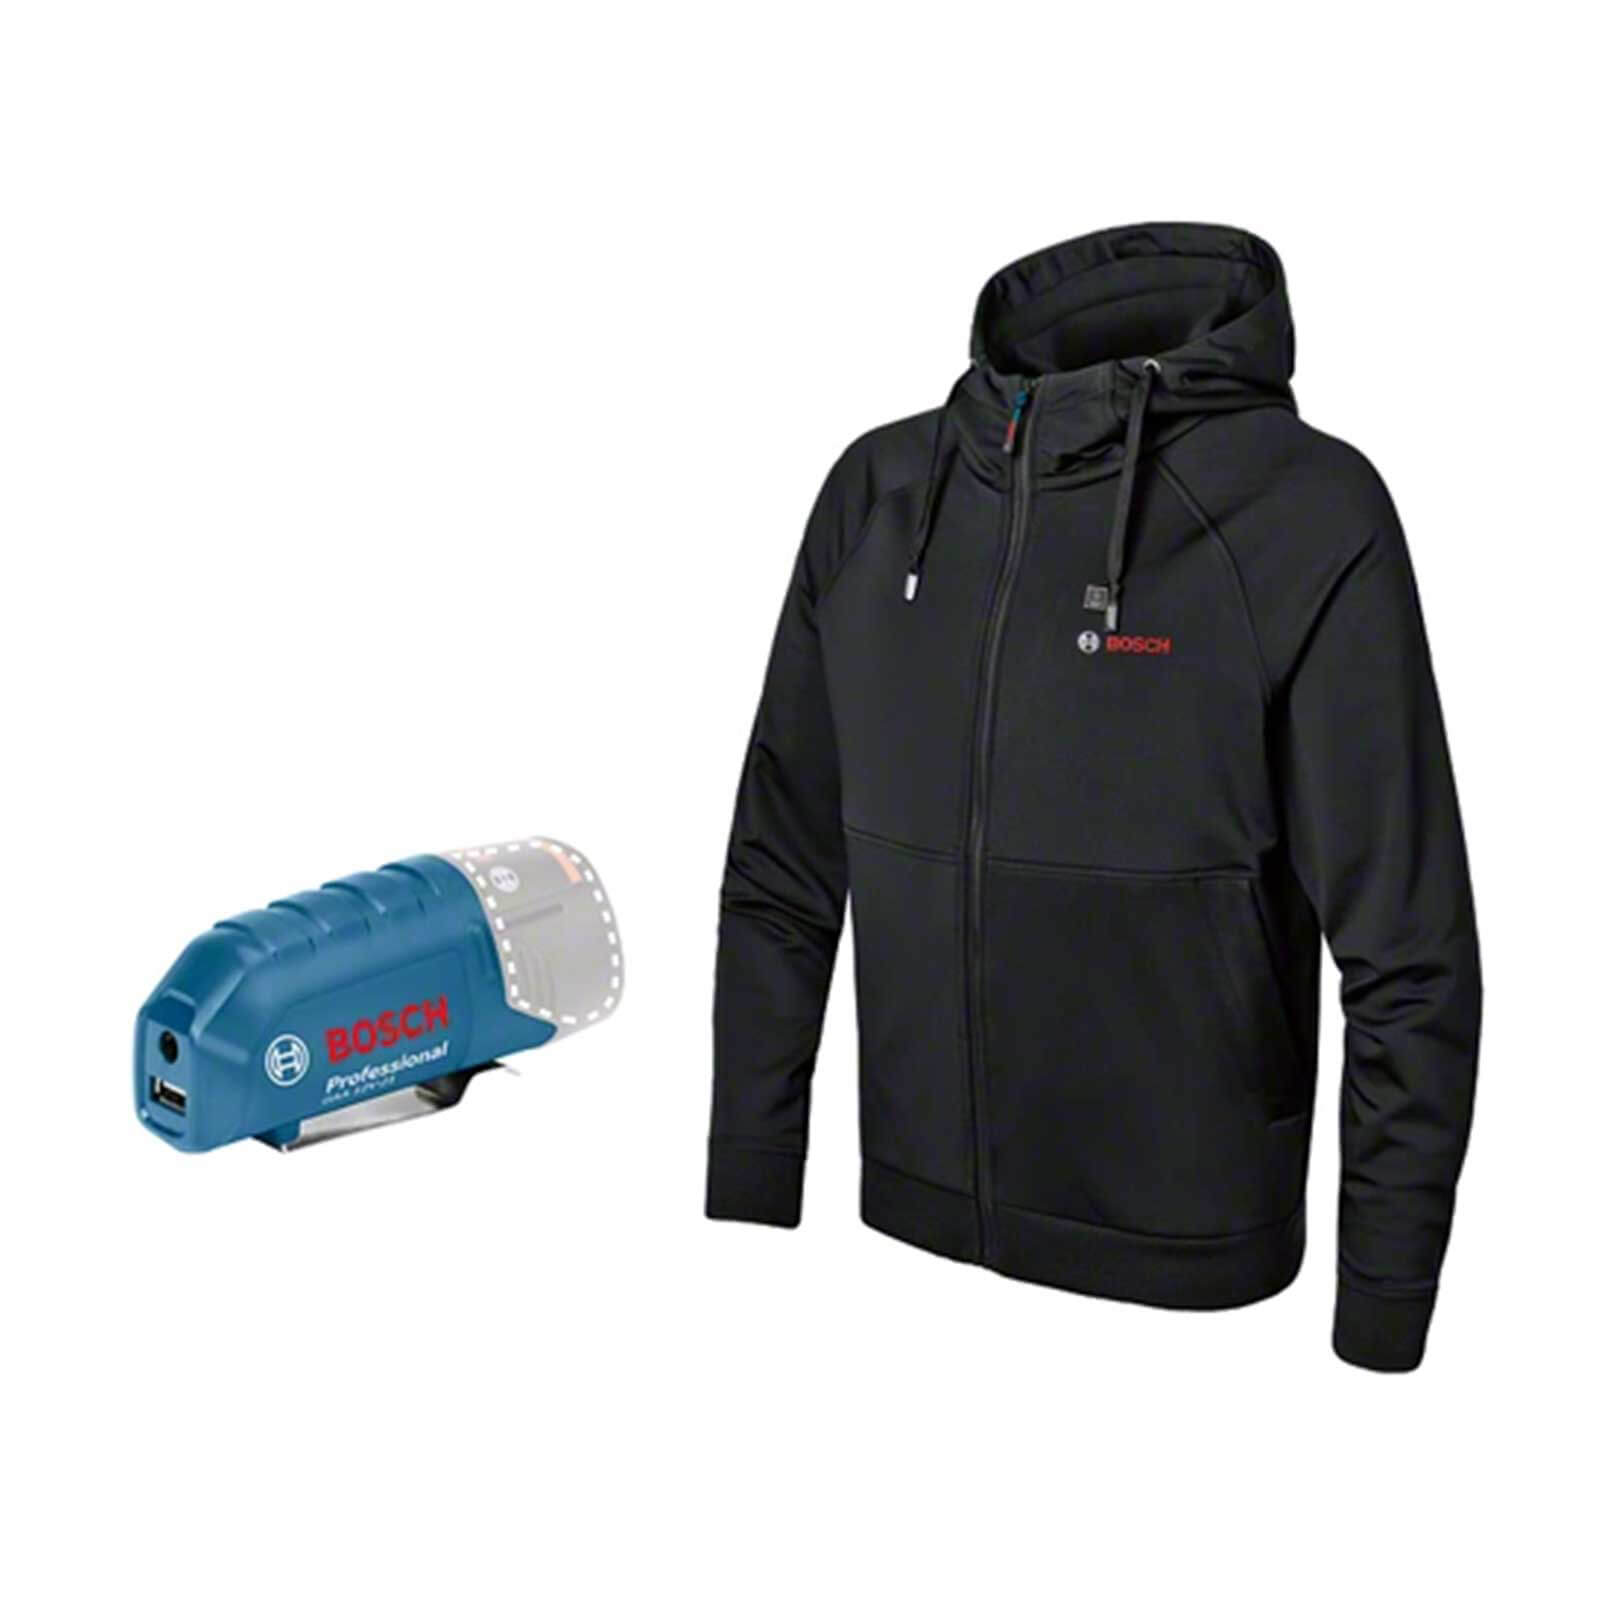 Image of Bosch GHH 12-18V Battery Heated Hoodie Black XL